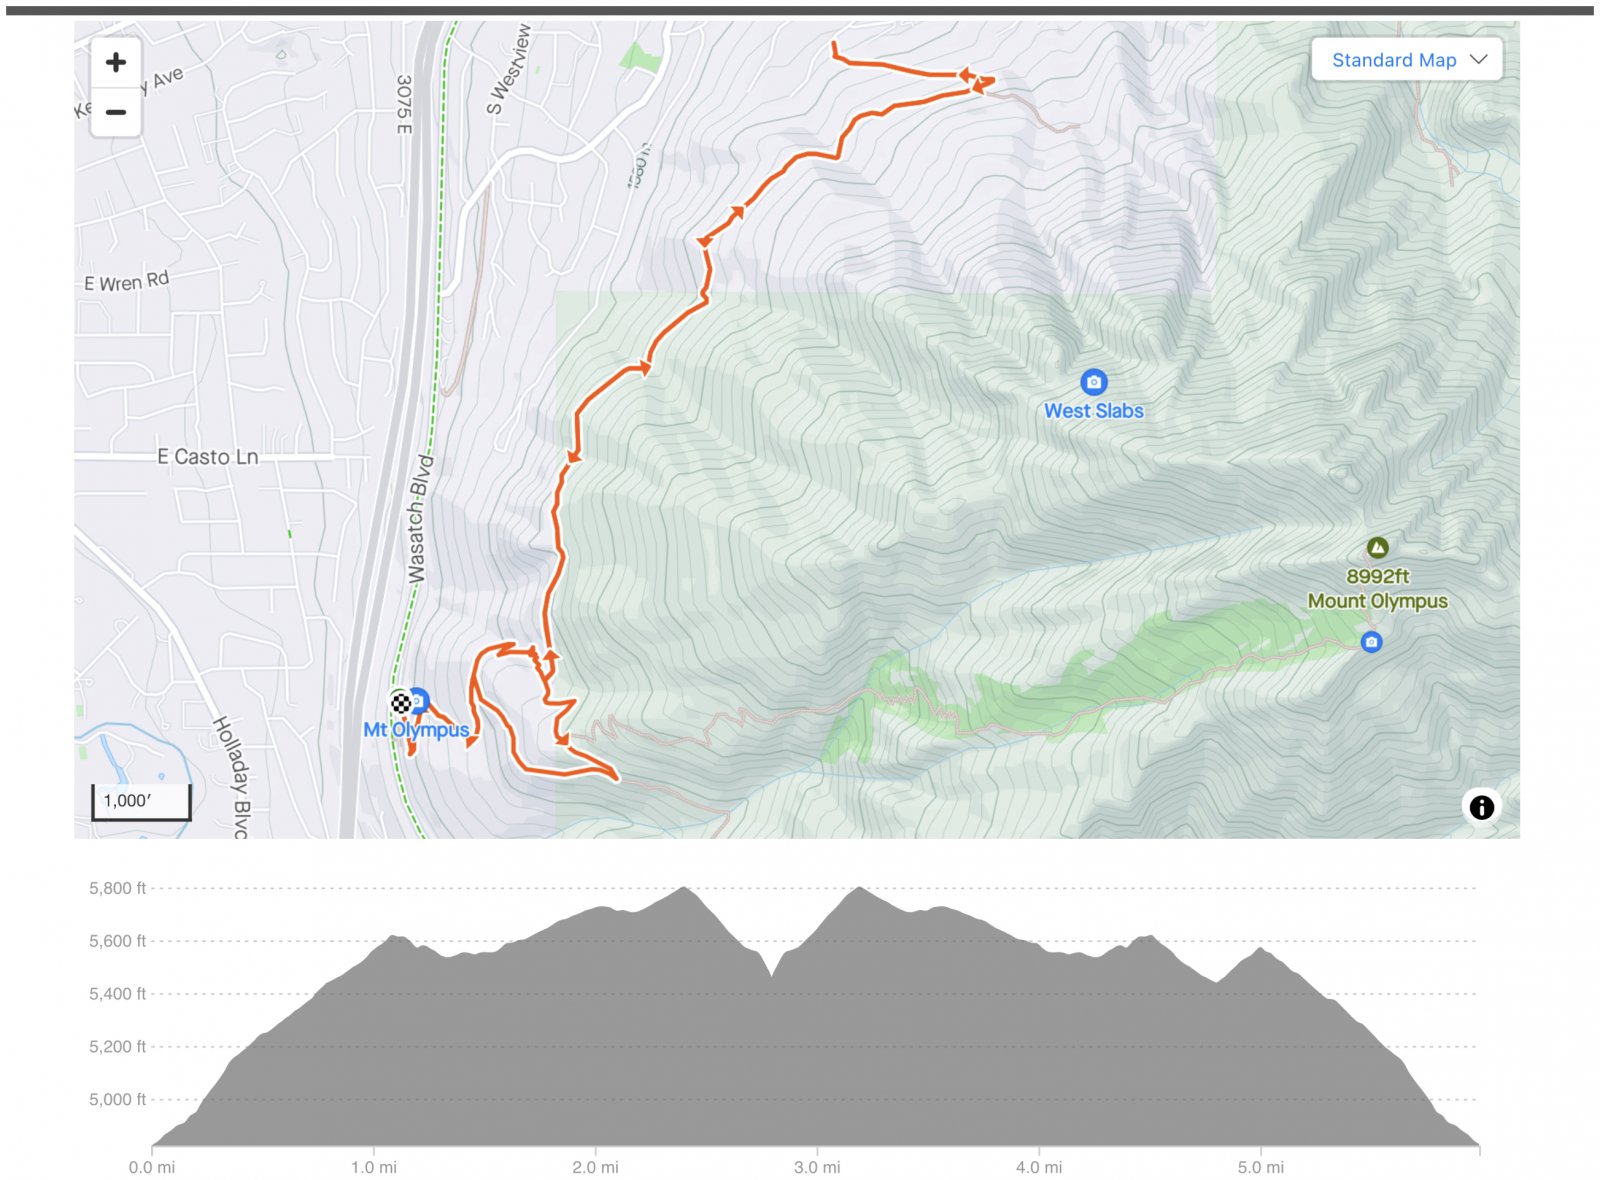 Route and elevation profile